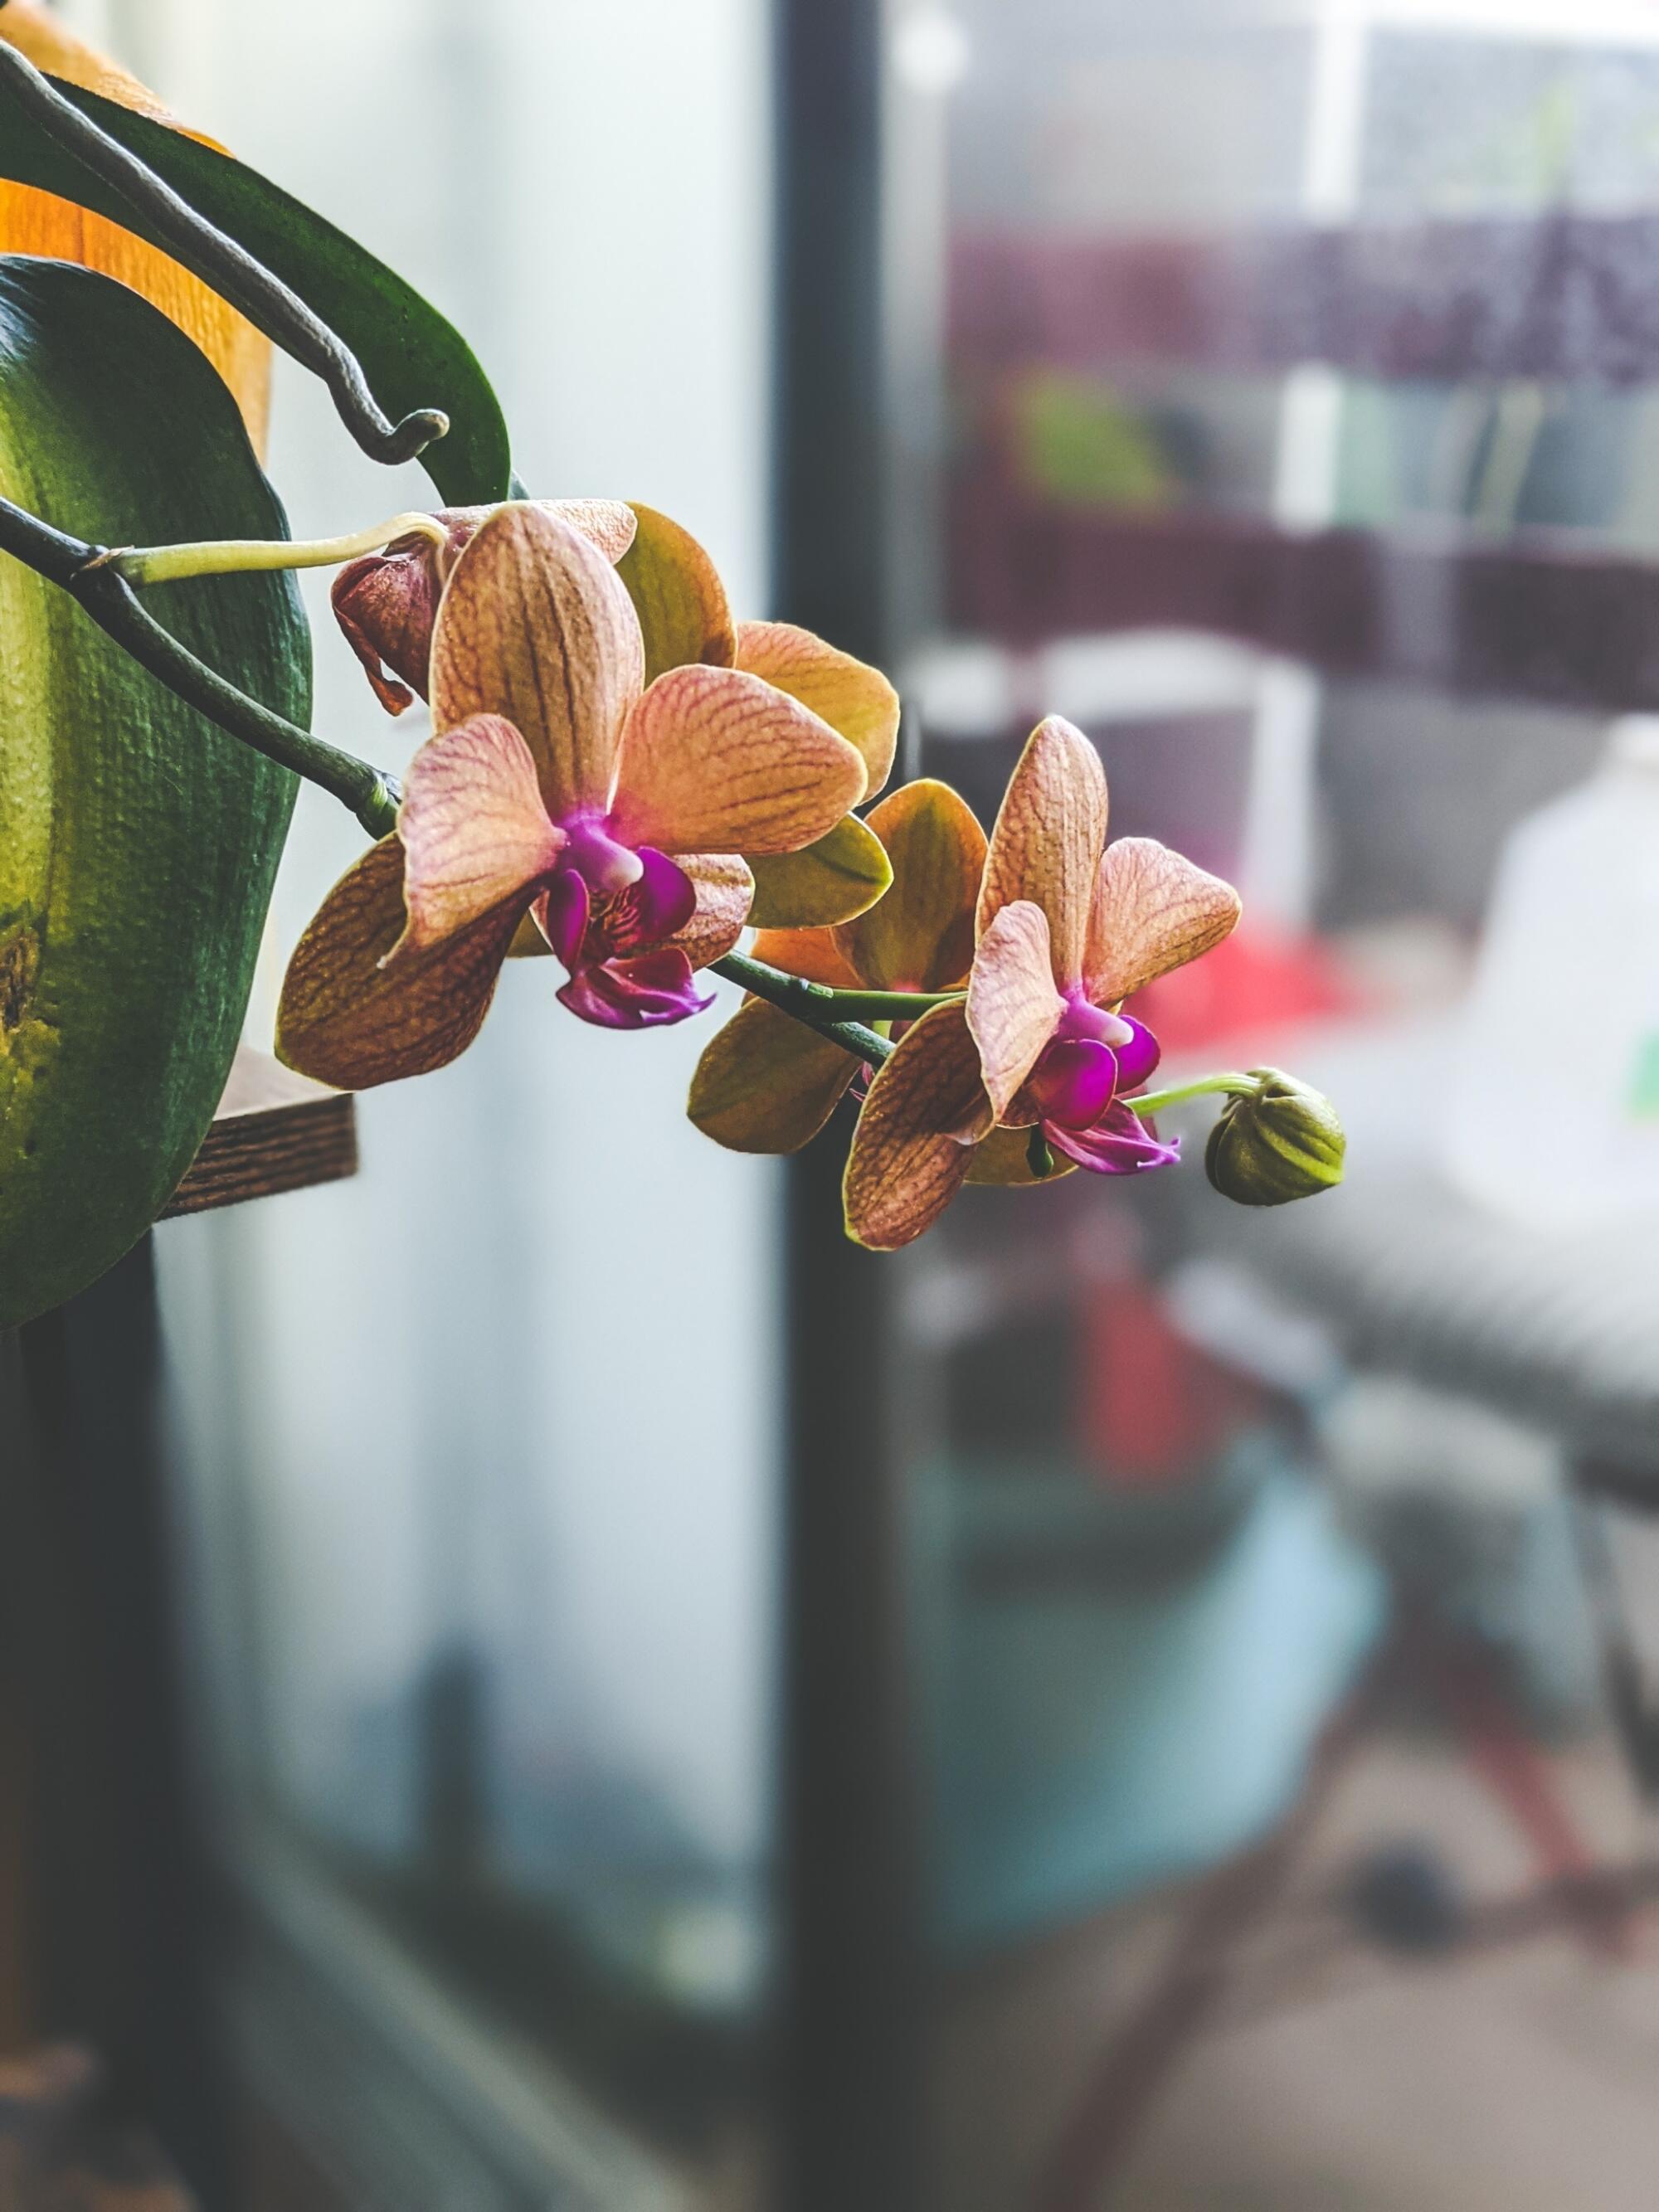 How to Repot Orchids to Keep Them Healthy and Happy